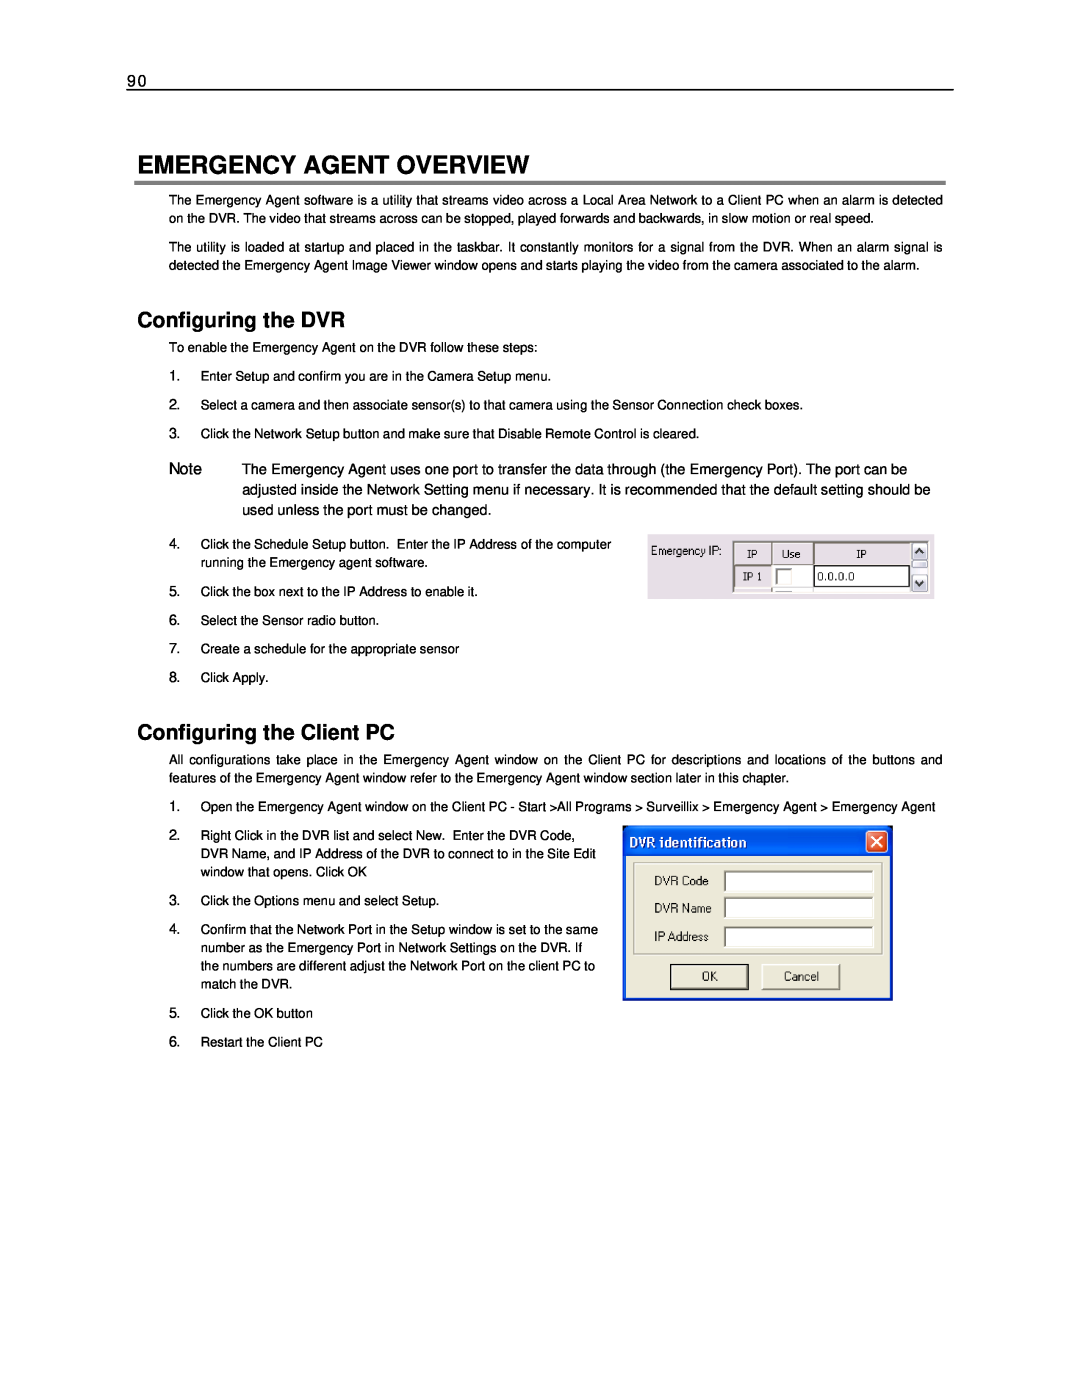 Toshiba NVS32-X, NVS16-X, NVS8-X user manual Emergency Agent Overview, Configuring the DVR, Configuring the Client PC 